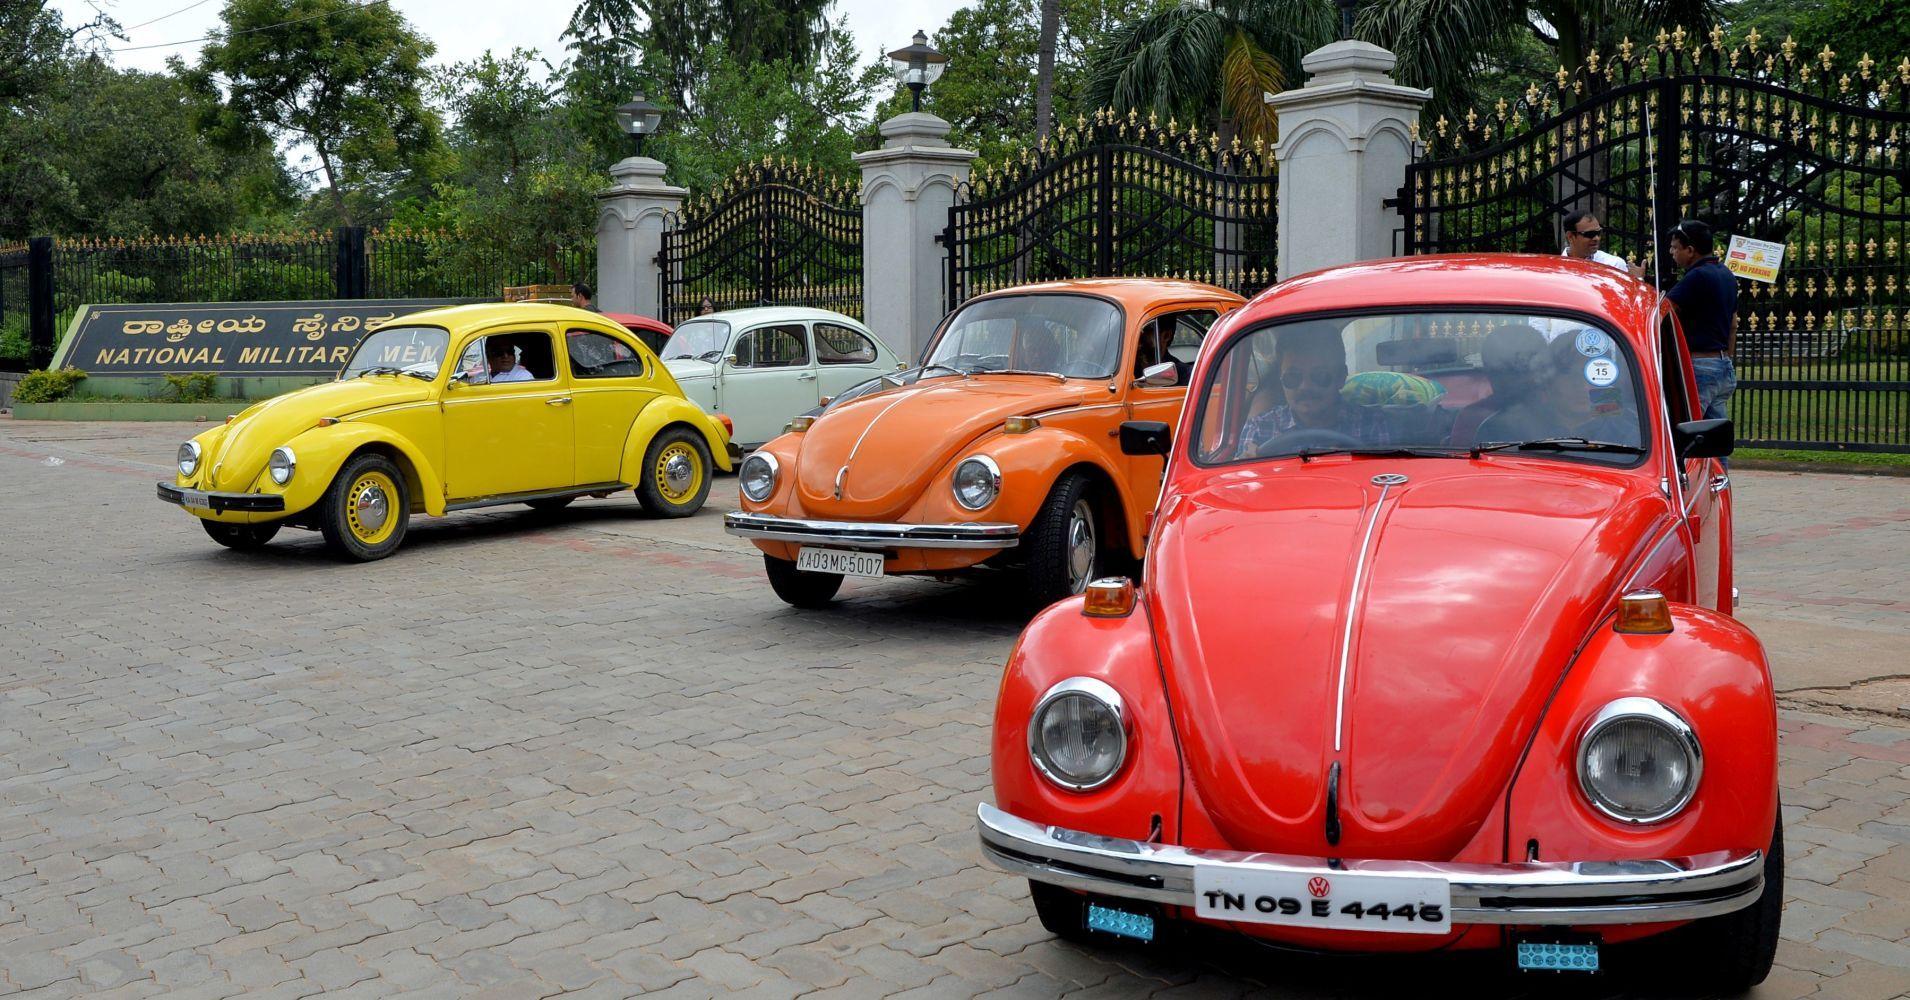 Vintage VW Bug Logo - The VW Beetle is dead. Again. Five cars that suffered the same fate